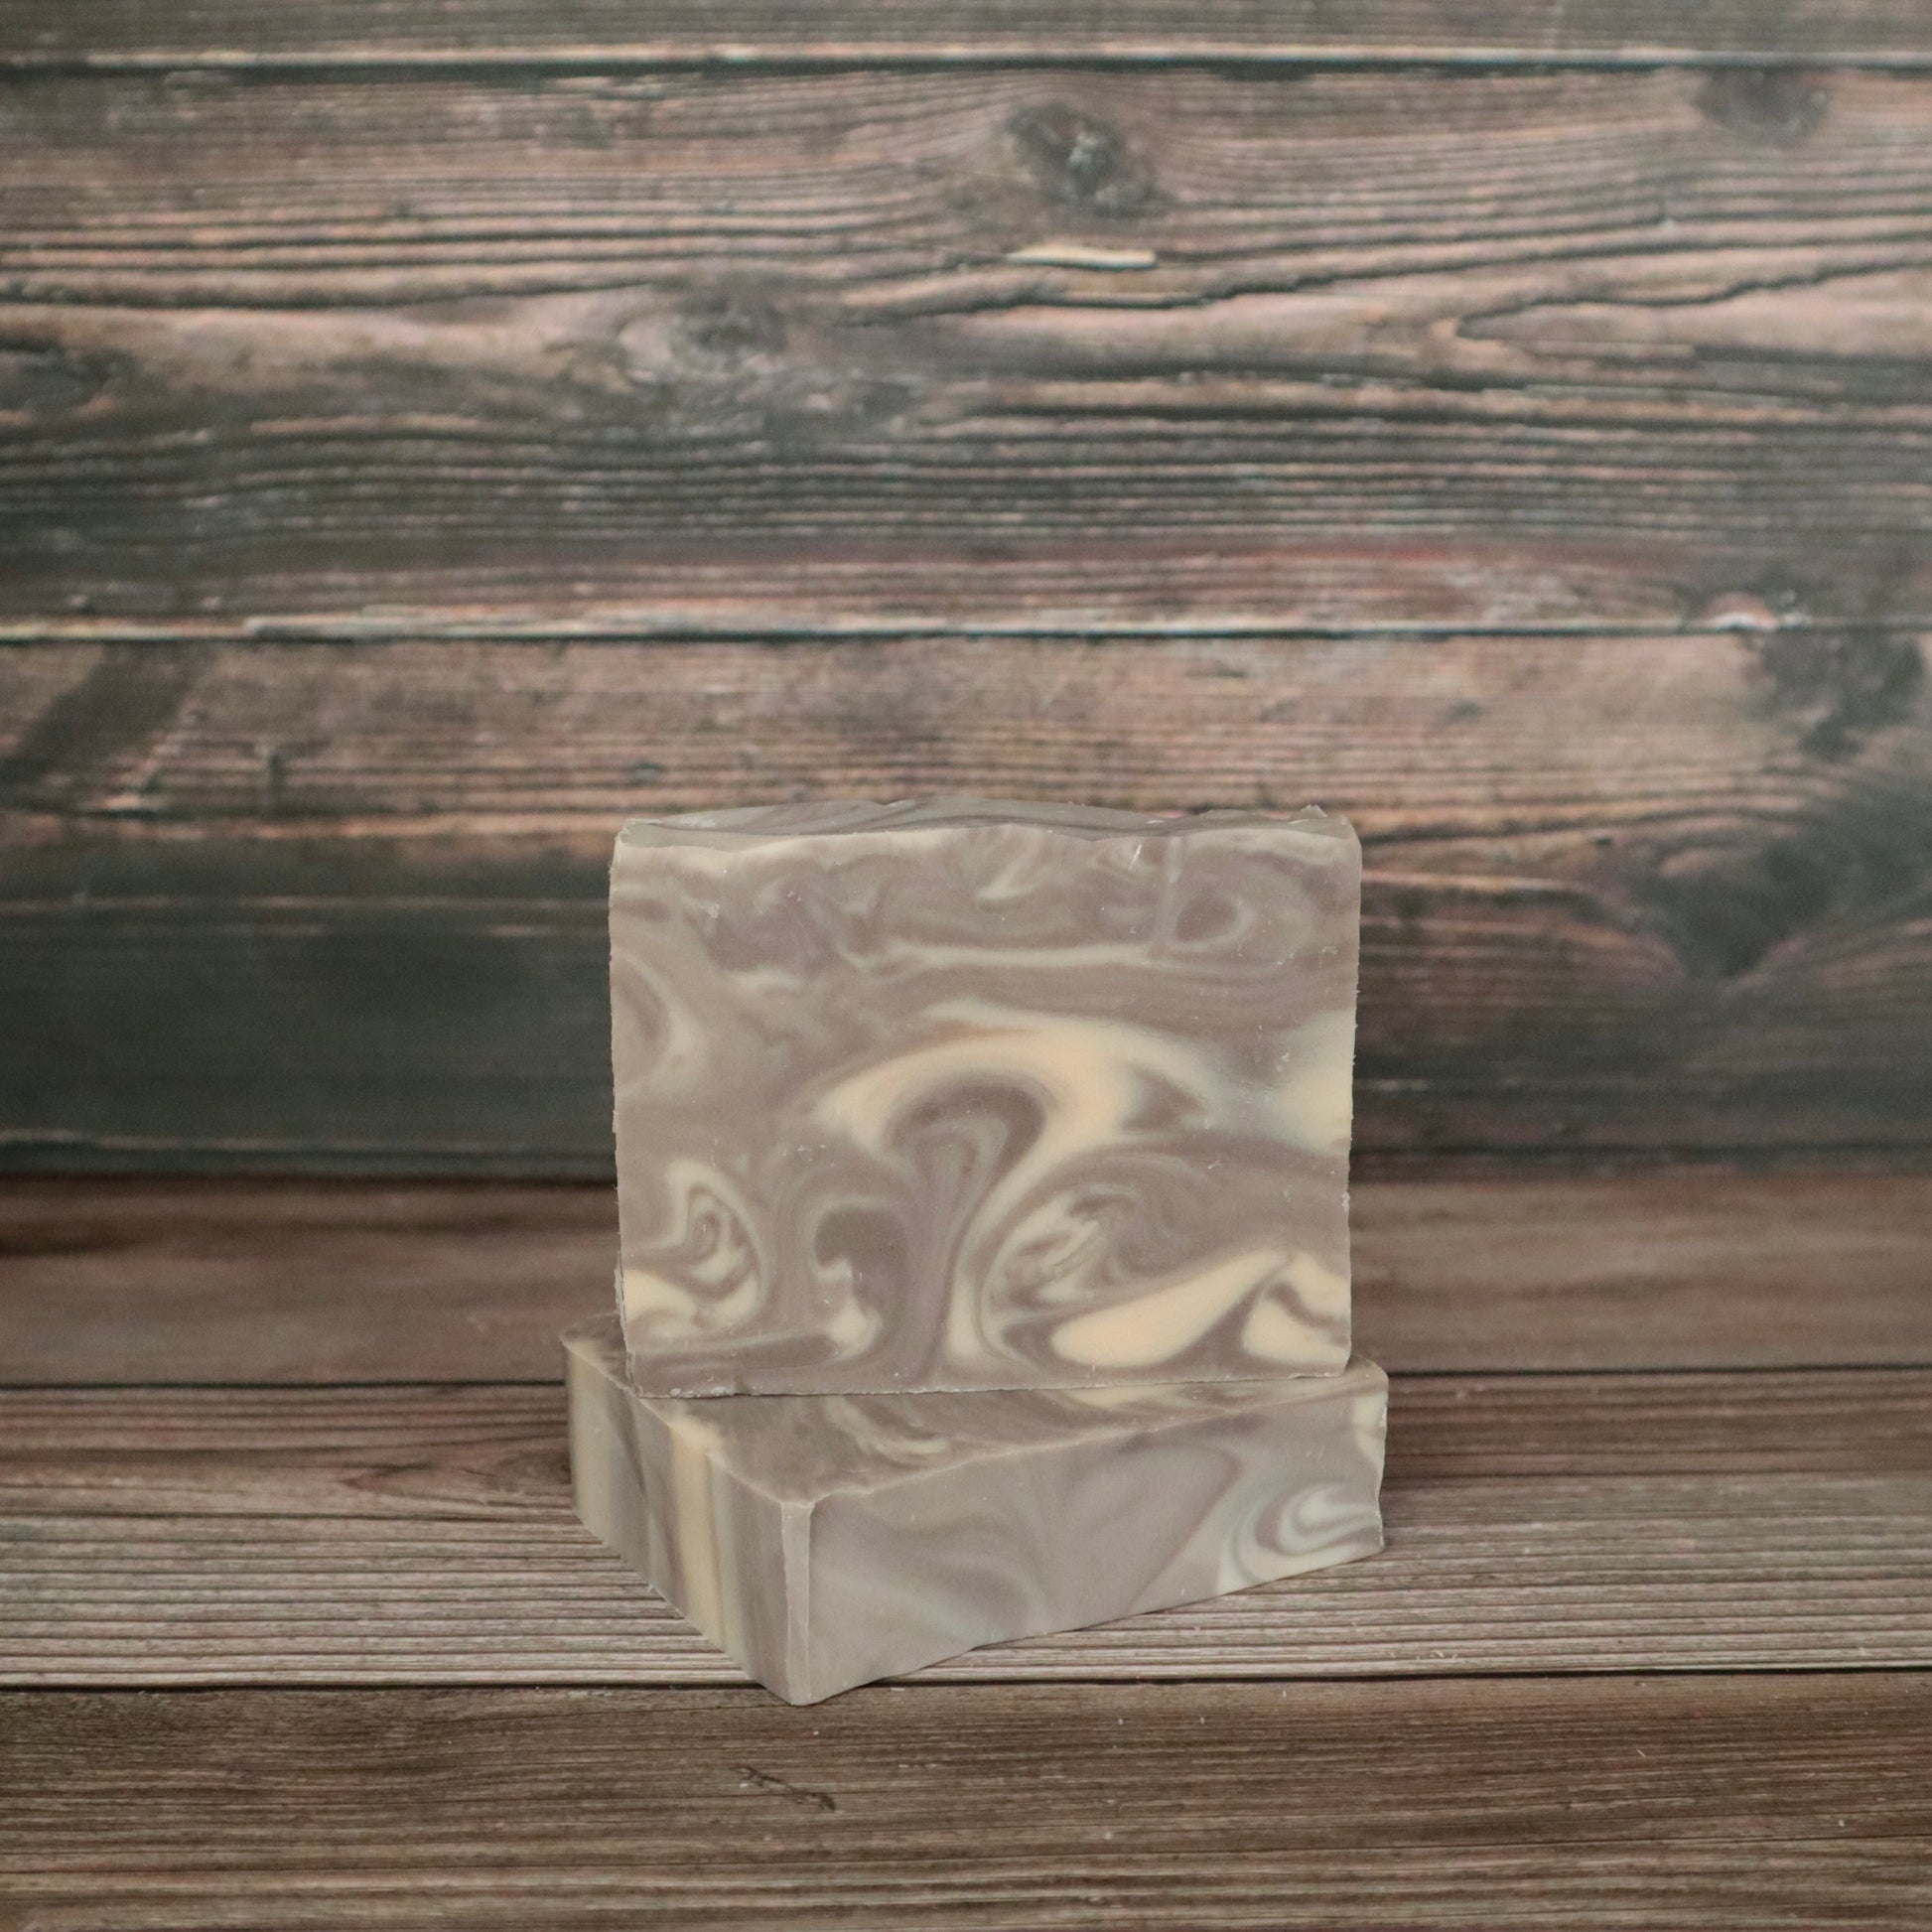 Two bars of soap with light brown and white/cream swirls resembling wood grain.